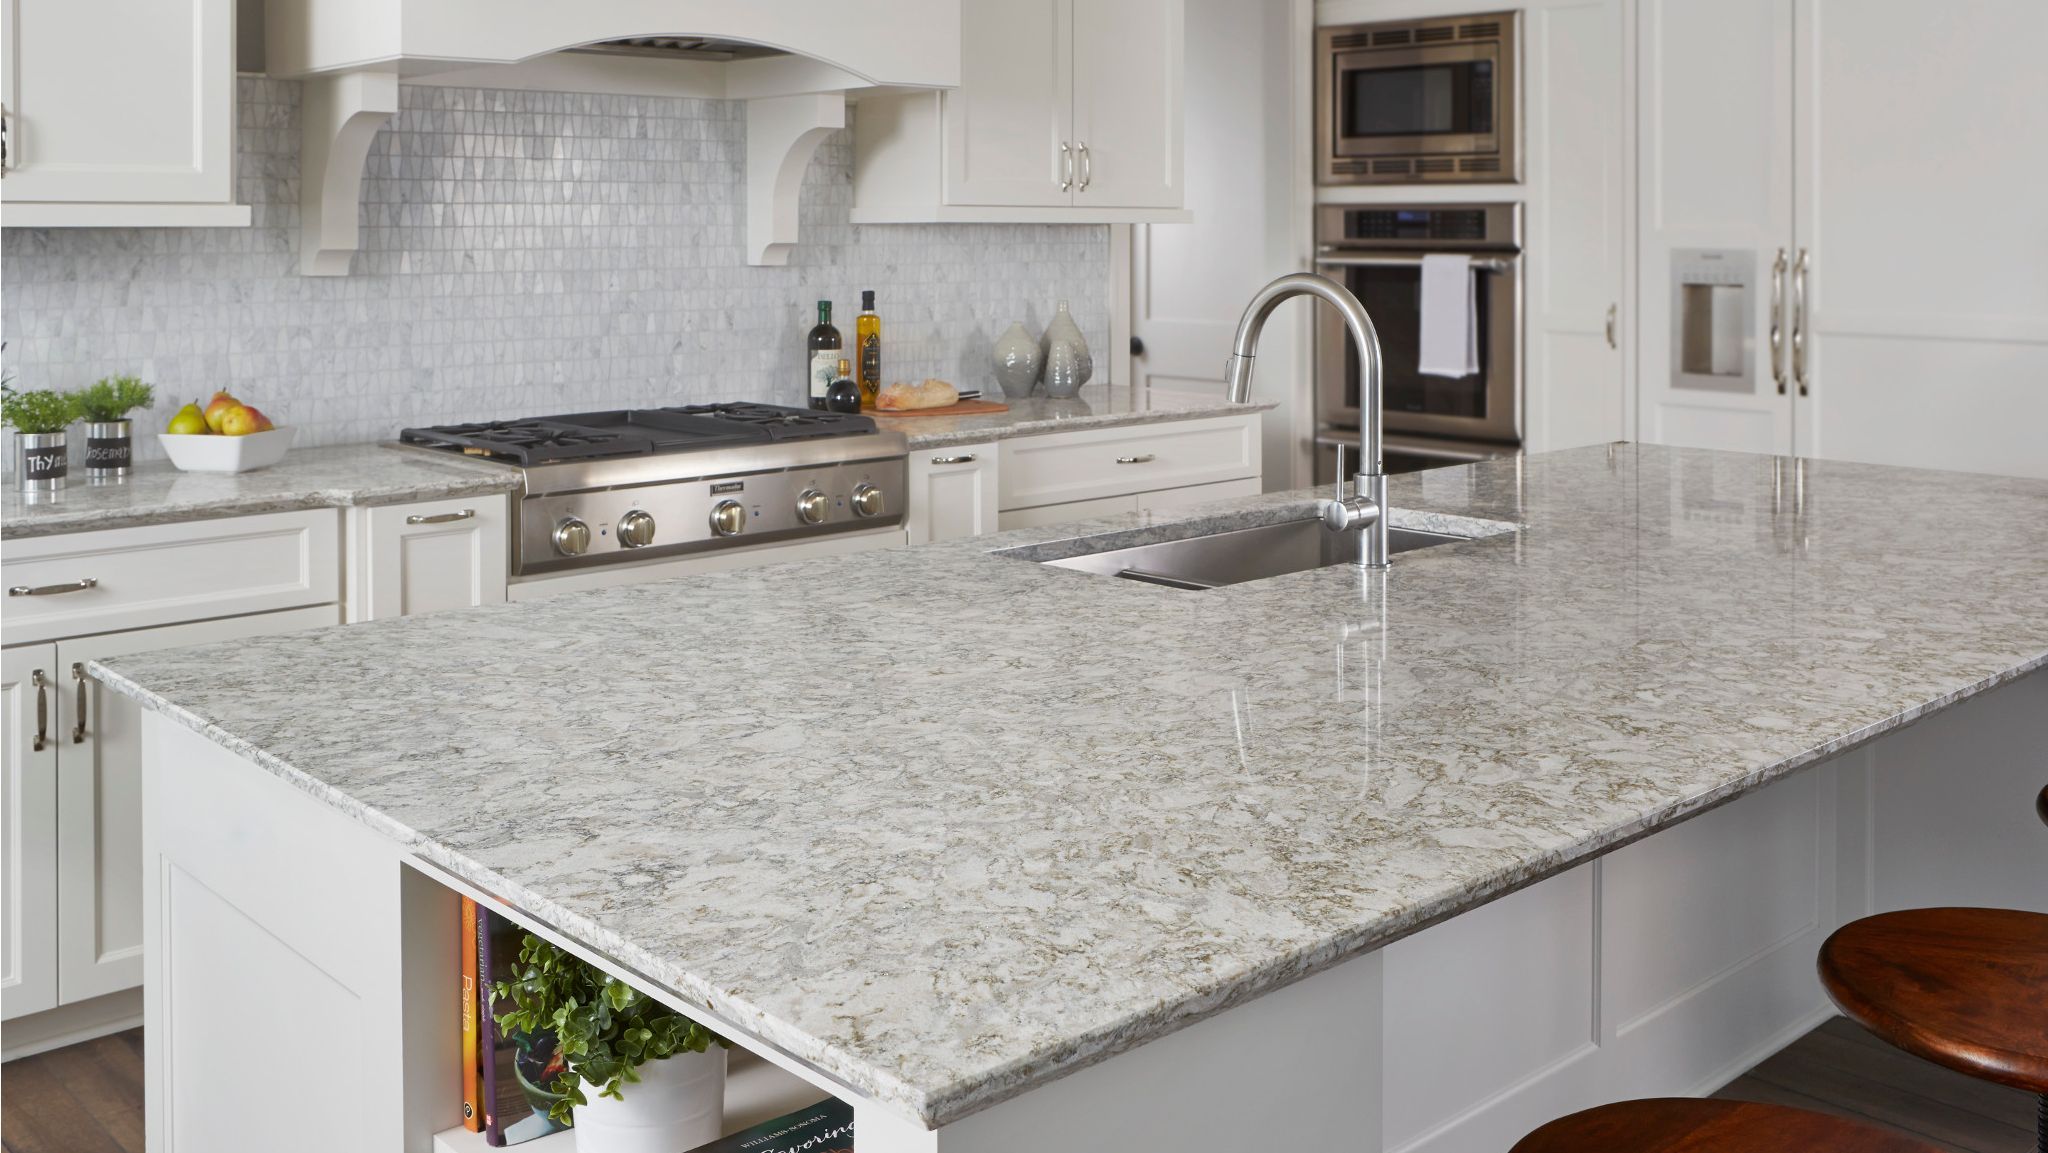 Crafter Granite Countertops In Wheaton - Countertops Are What We Do Best!